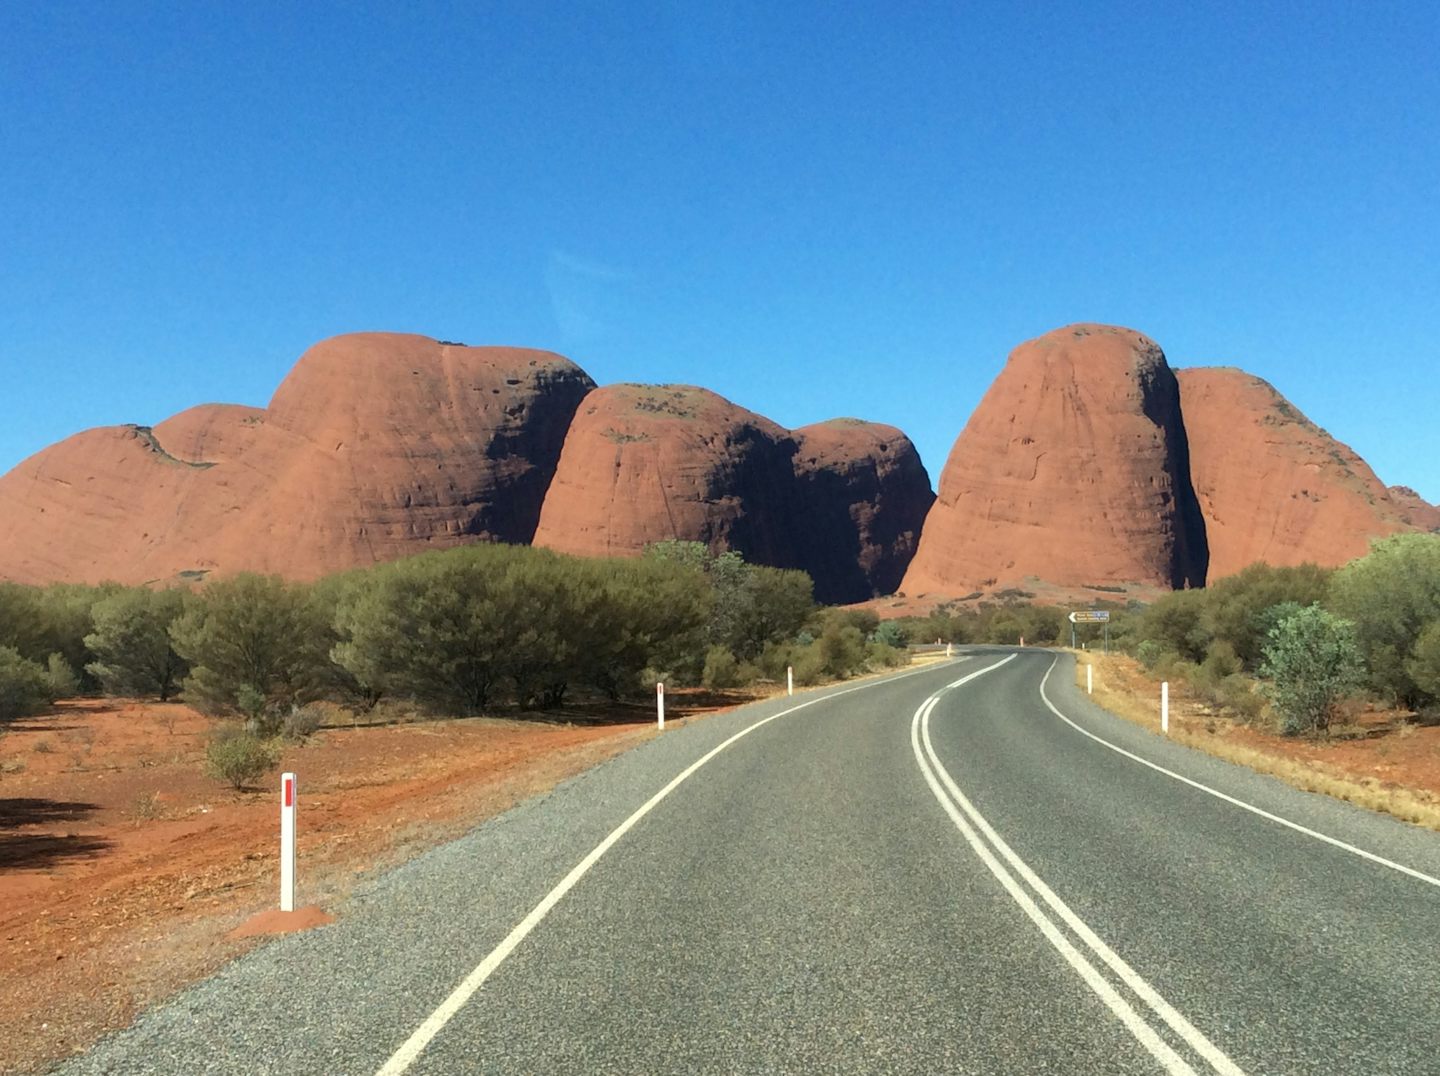 On way to Ayers Rock in Australia outback